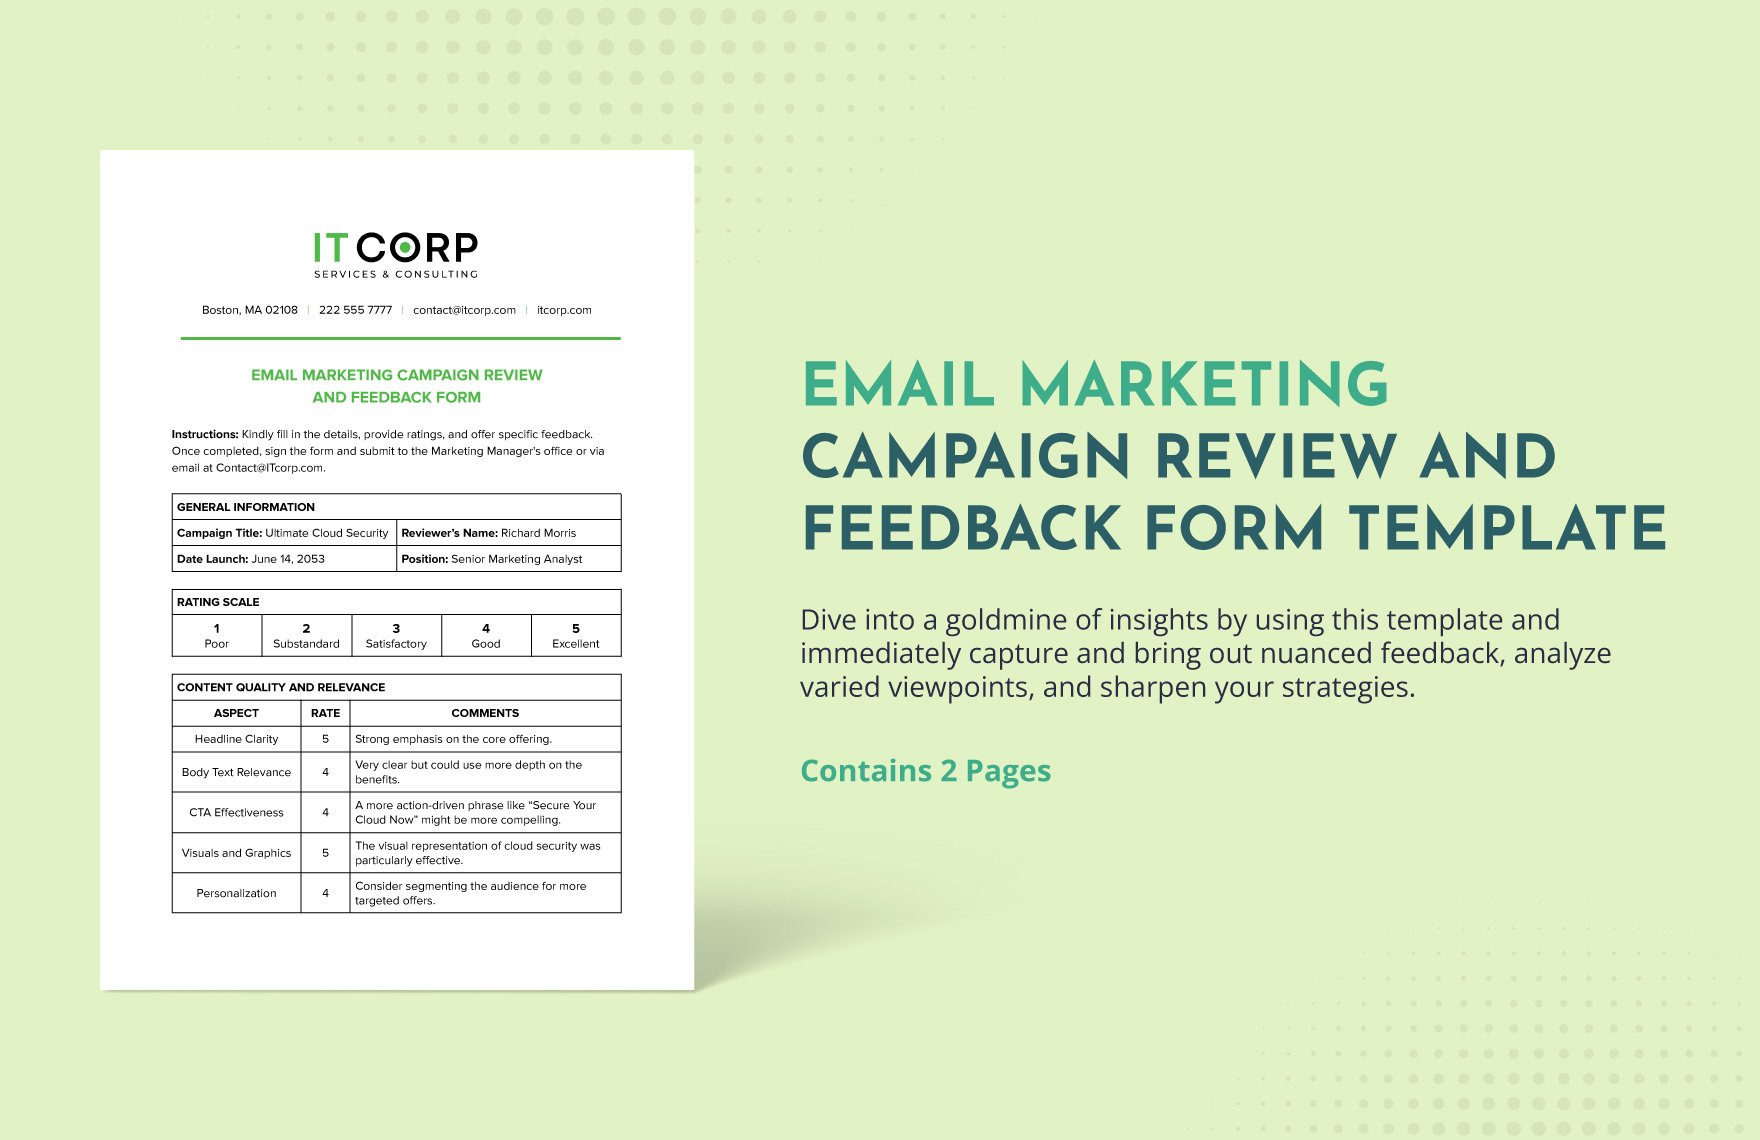 Email Marketing Campaign Review and Feedback Form Template